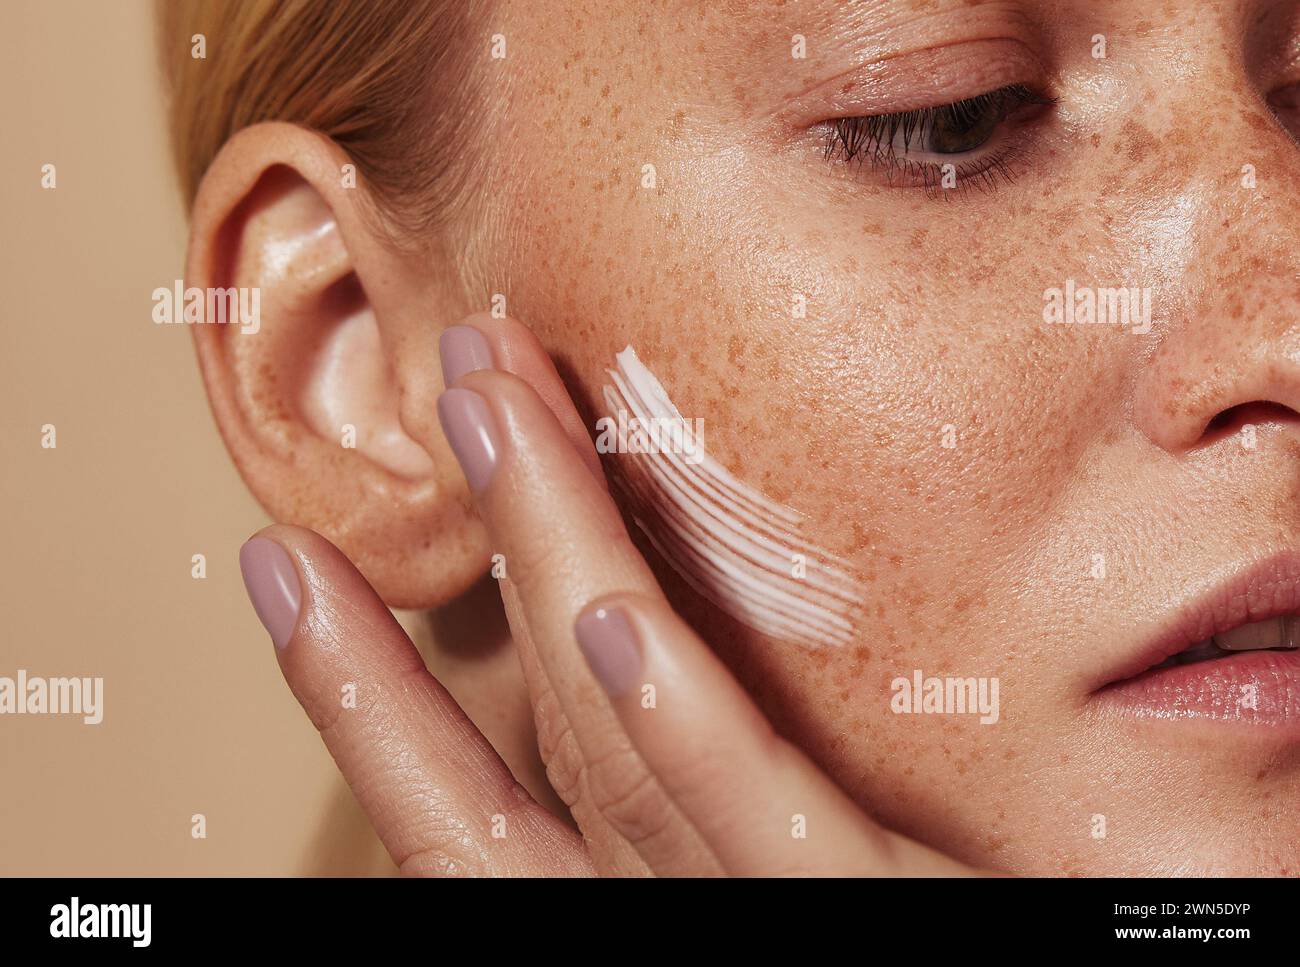 Close up highly detailed shot of a young woman applying cream on her freckled skin. Cropped shot of woman applying moisturizer on cheek with fingers. Stock Photo